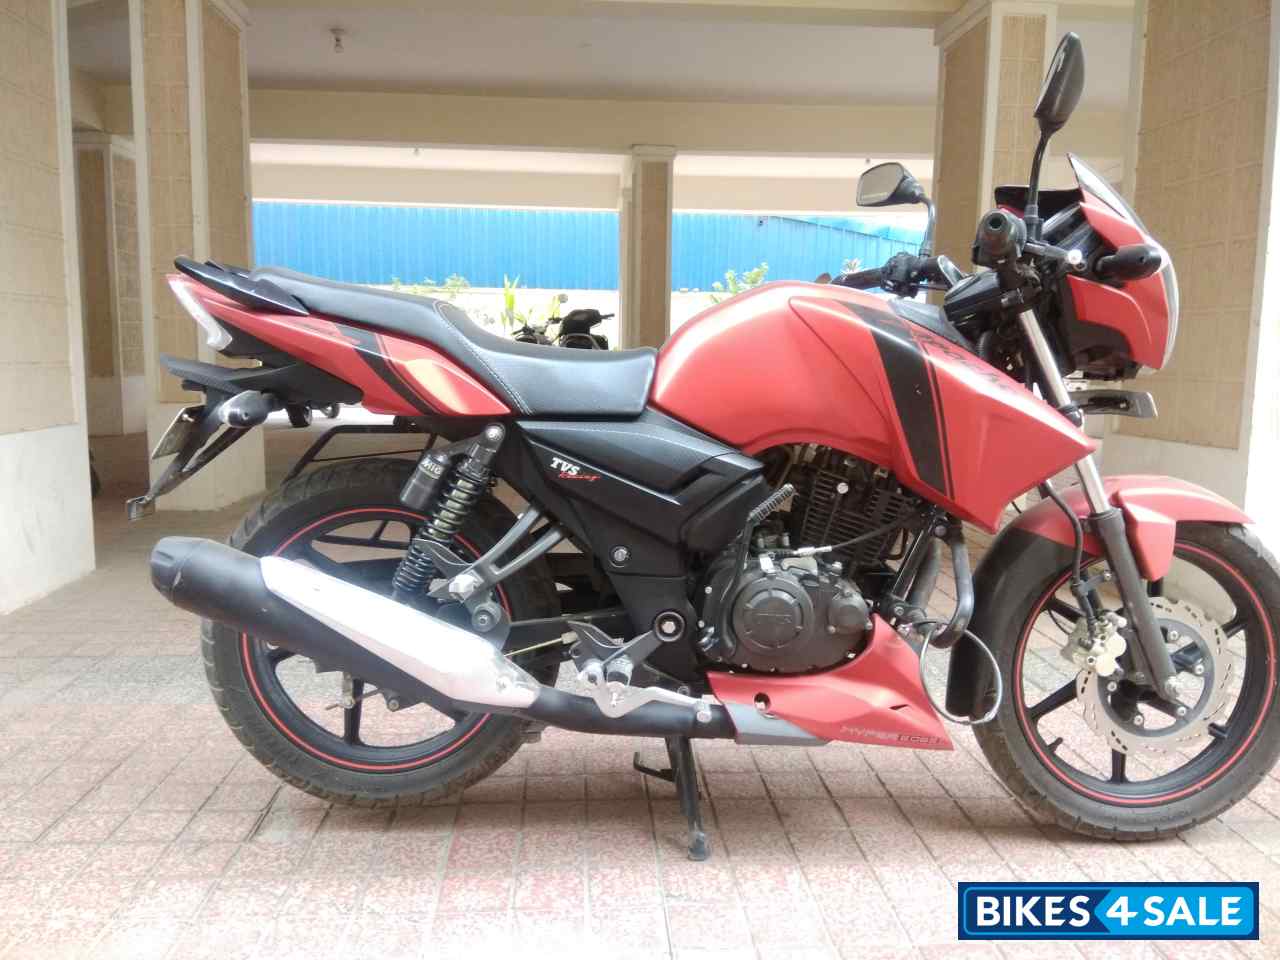 Used 2018 Model Tvs Apache Rtr 160 For Sale In Hyderabad Id 220840 Matte Red Colour Bikes4sale